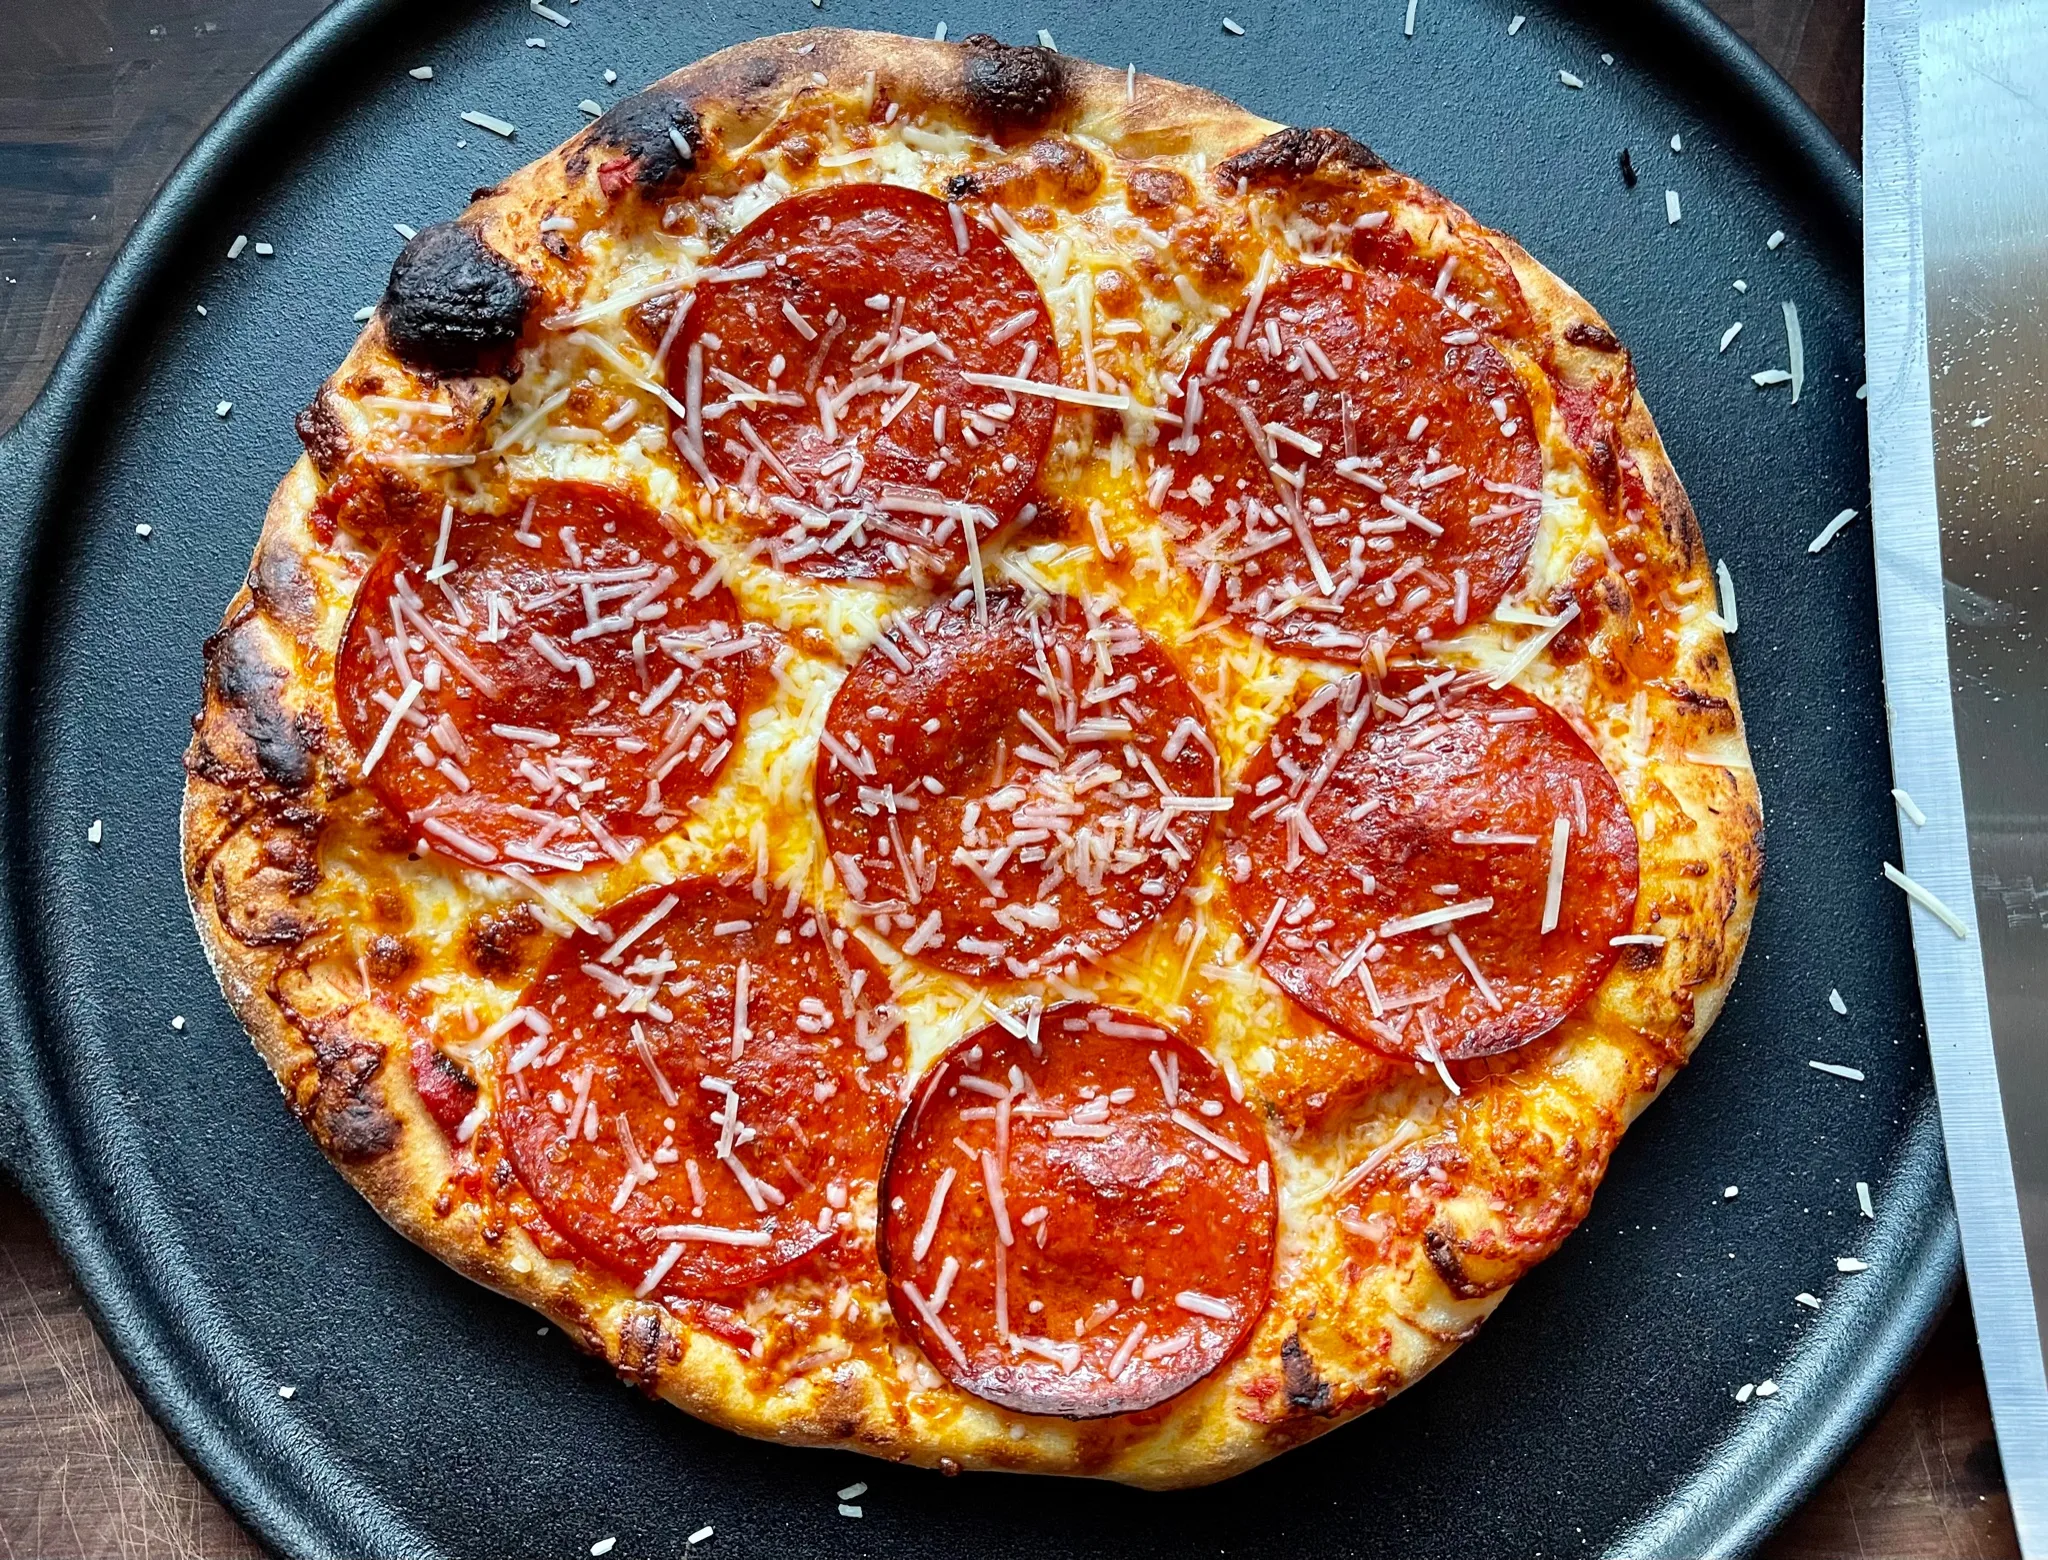 gregs pepperoni pizza